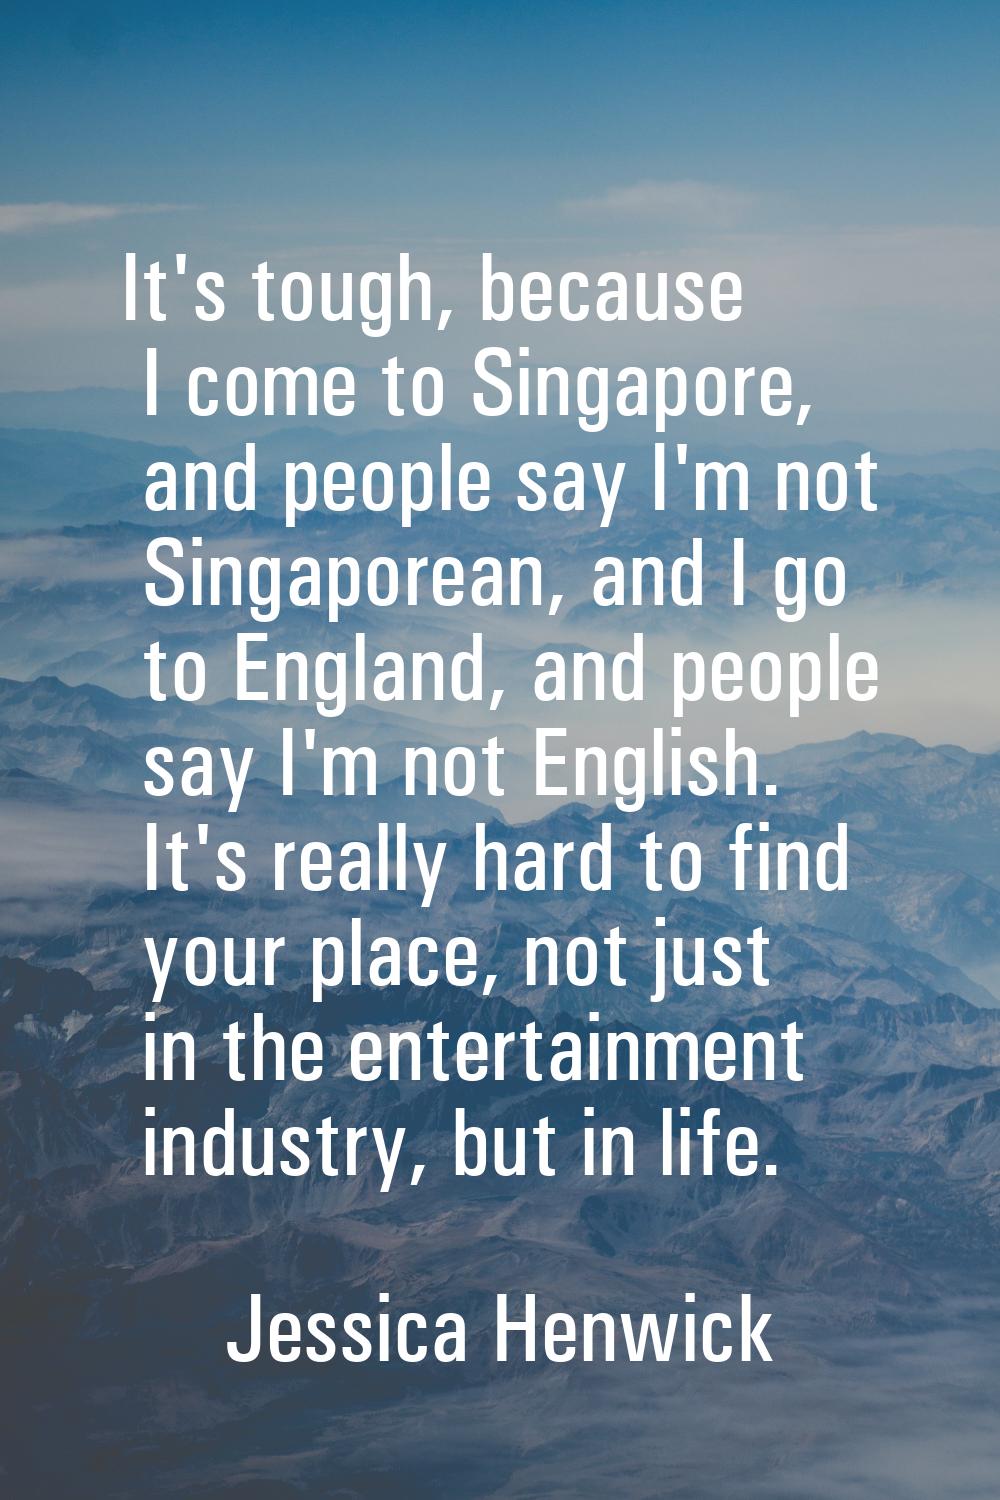 It's tough, because I come to Singapore, and people say I'm not Singaporean, and I go to England, a